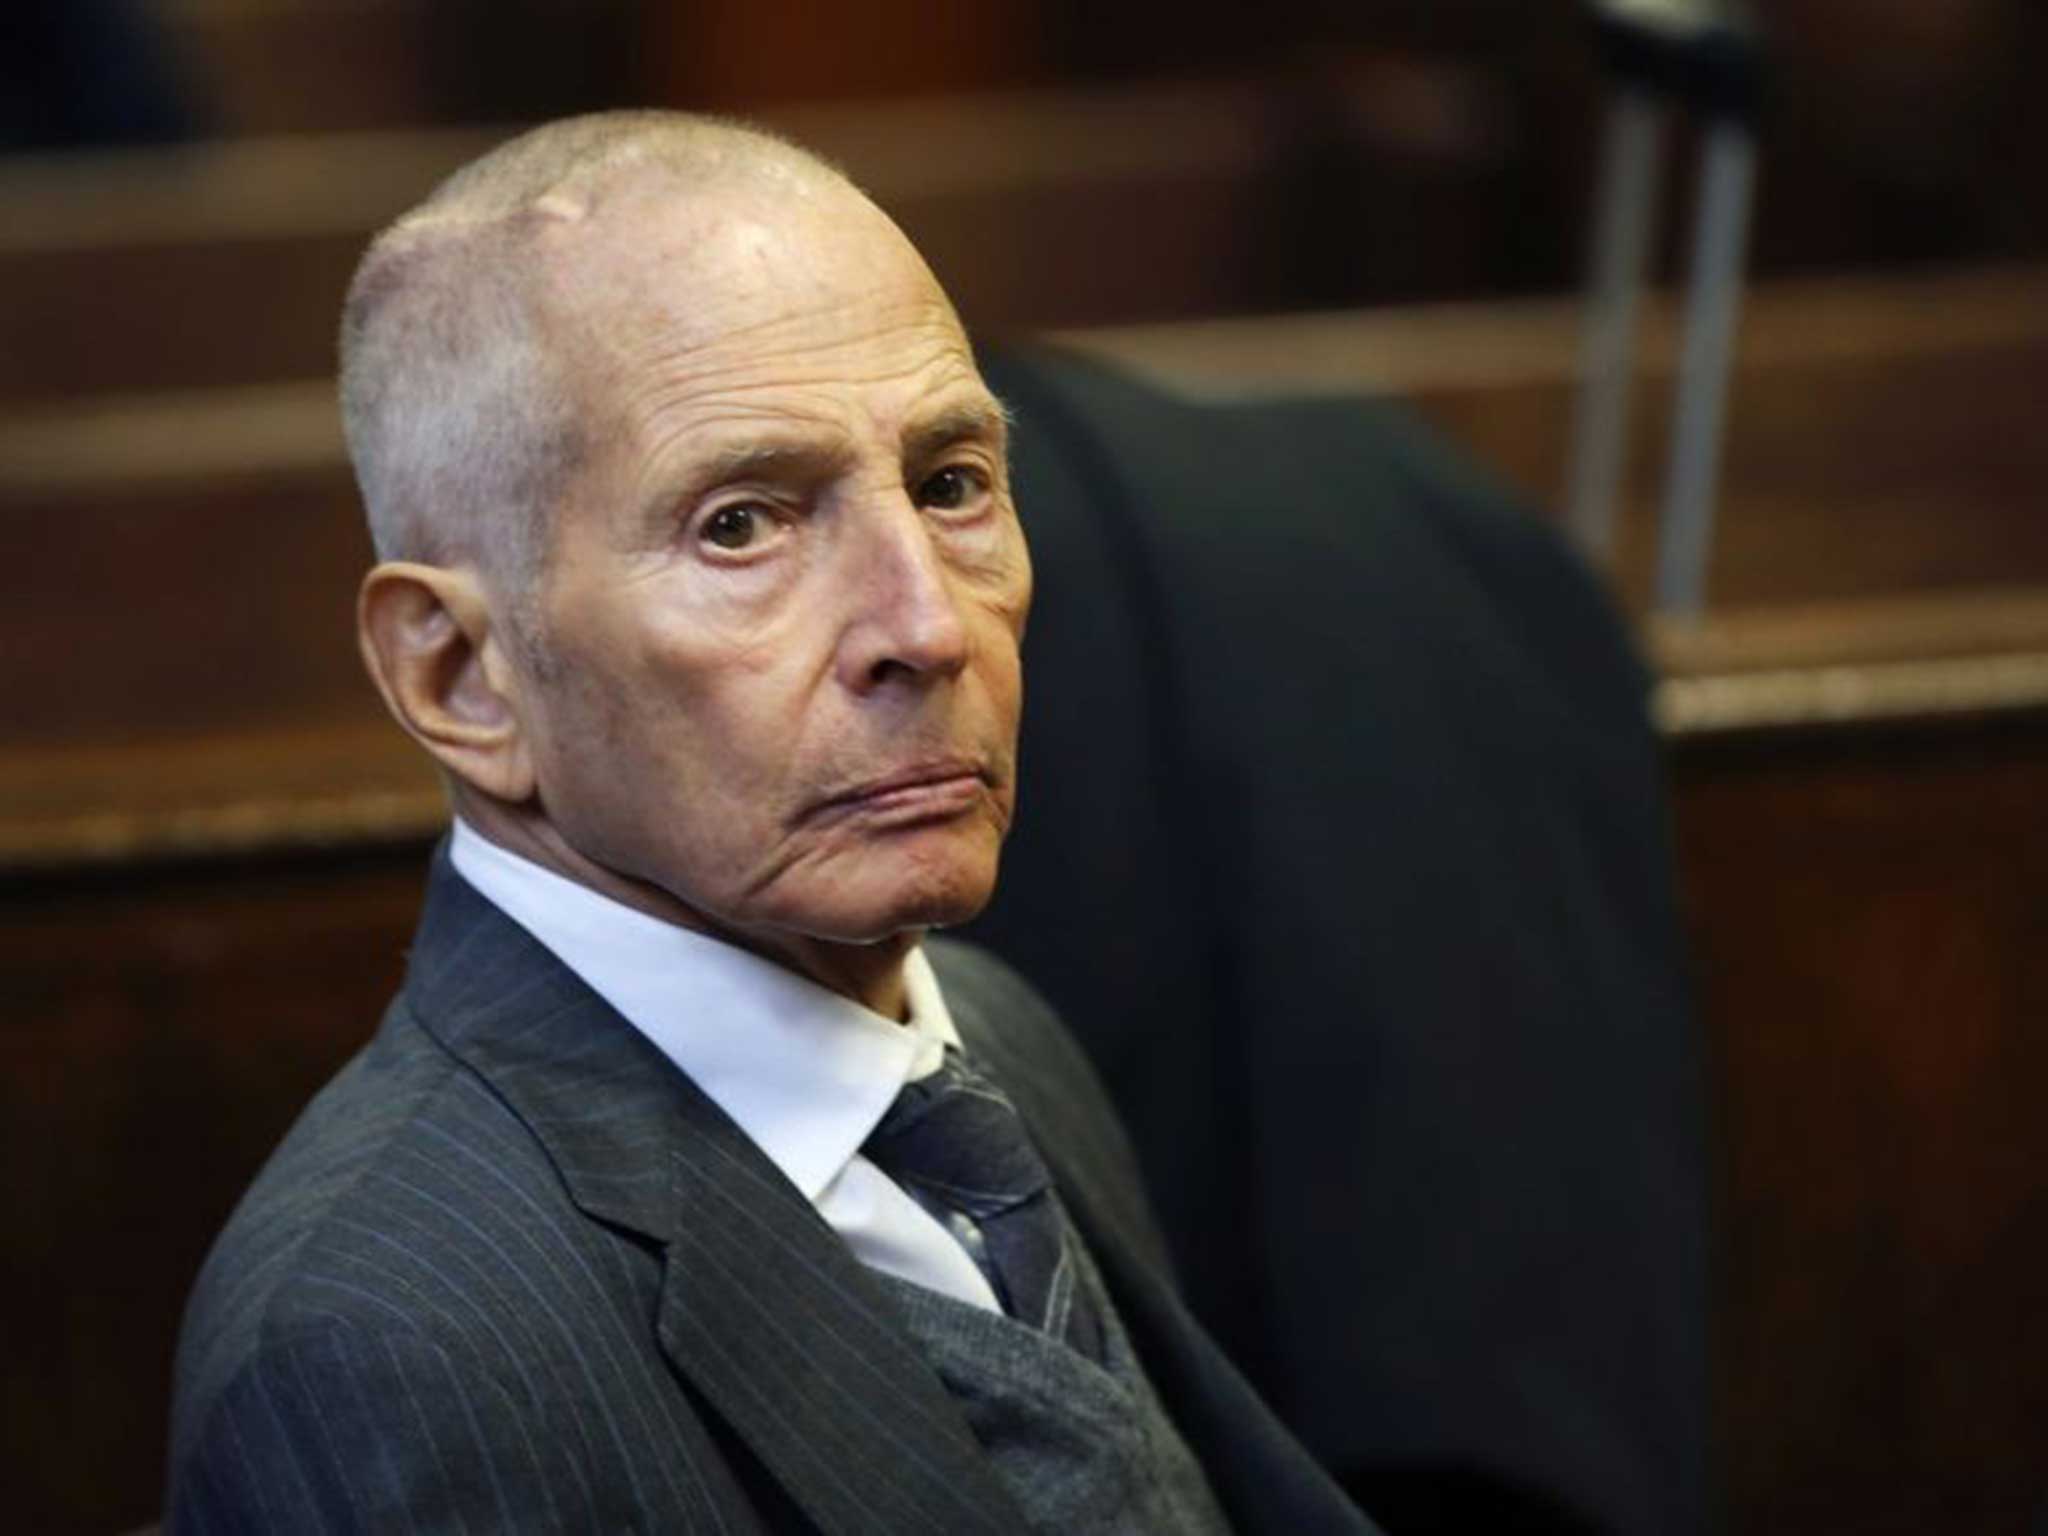 Robert Durst, the property heir charged with first-degree murder